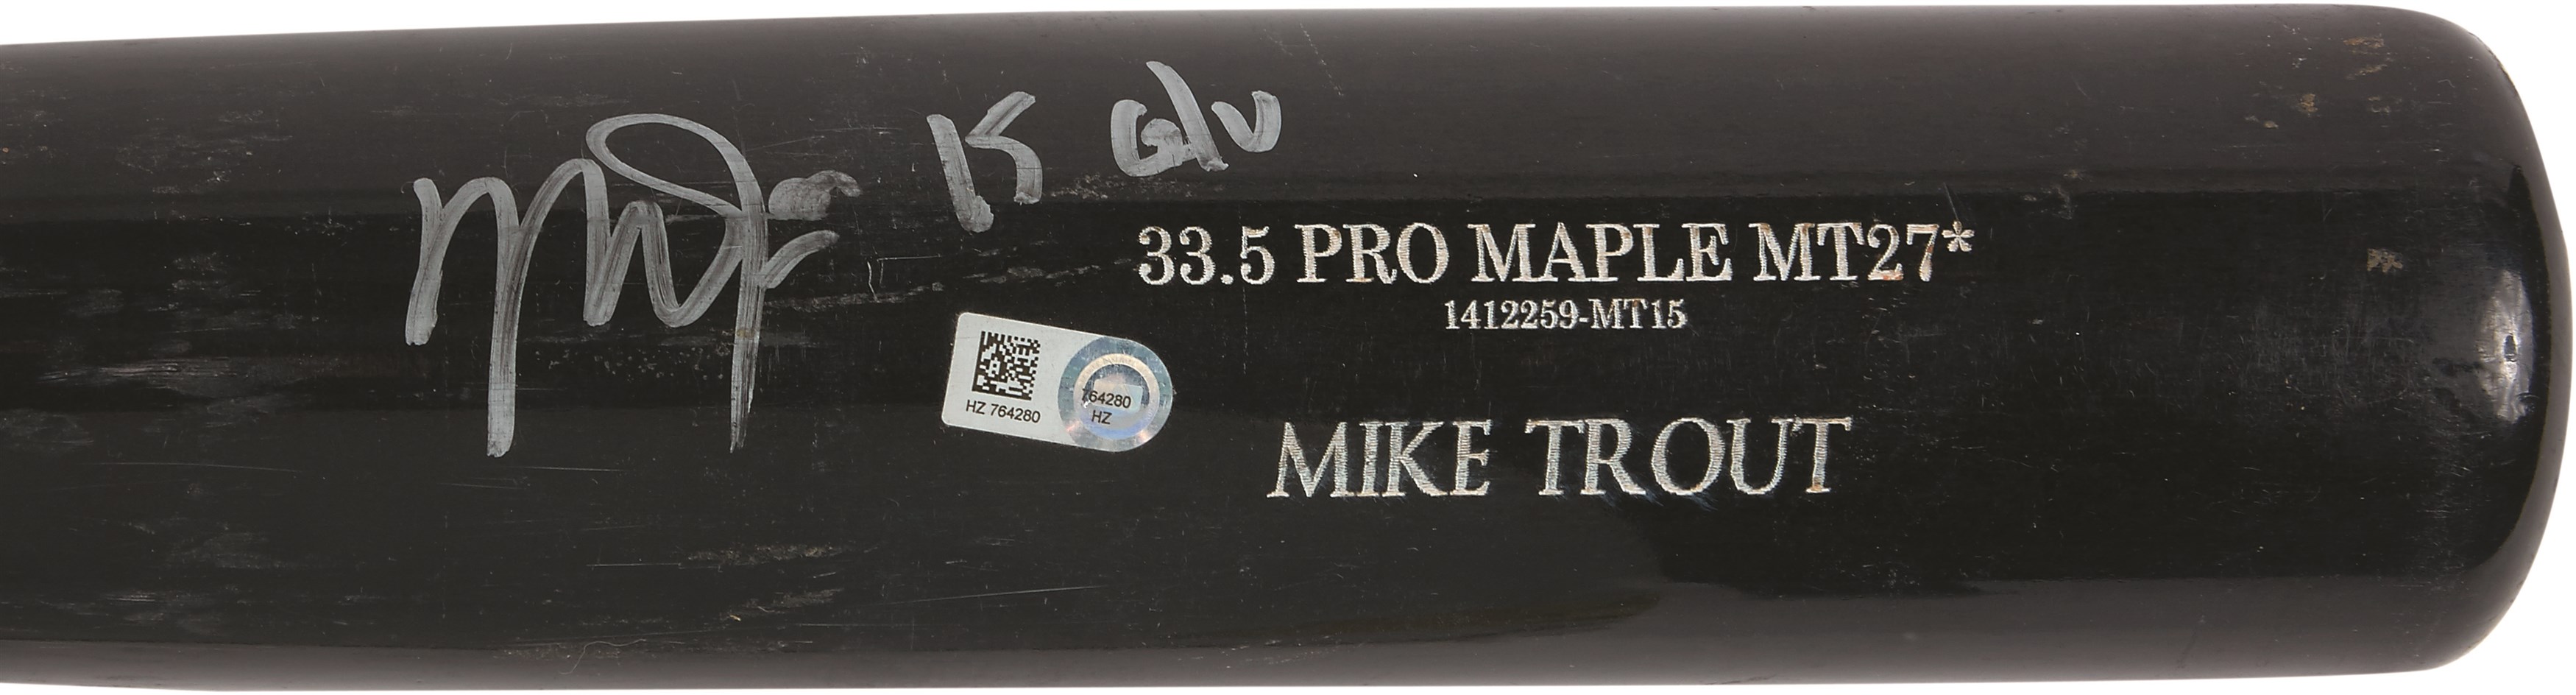 Baseball Equipment - 2015 Mike Trout Signed Game Used "Shattered" Bat (MLB Auth., Video Proof, Photo-Matched)